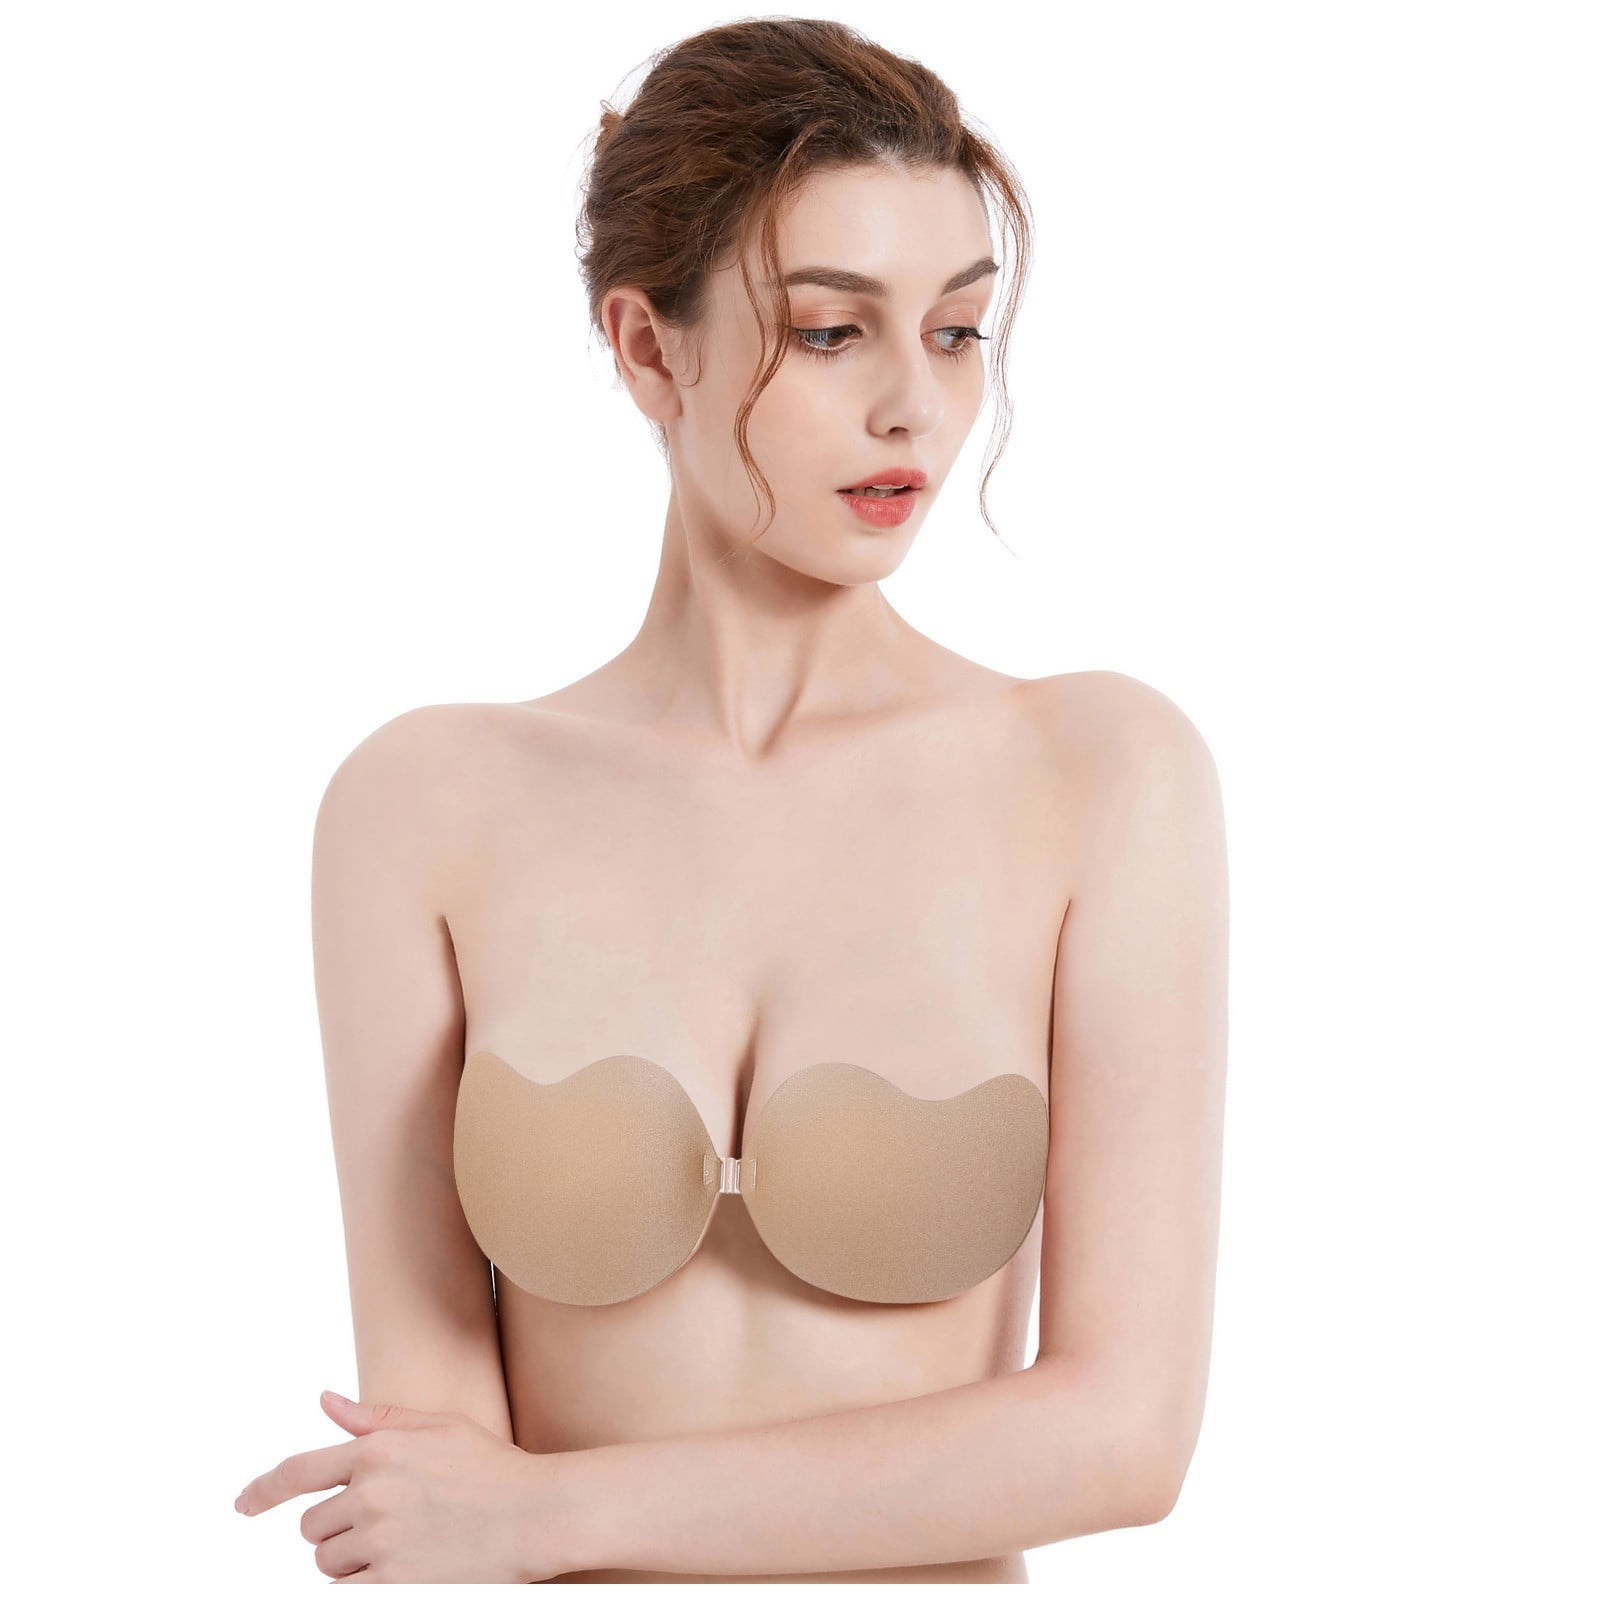 Invisible Adhesive Strapless Bra 2 Pack Sticky Push Up Silicone Bra For  Women Backless Dress With Breast Lift Tape [free Shipping]